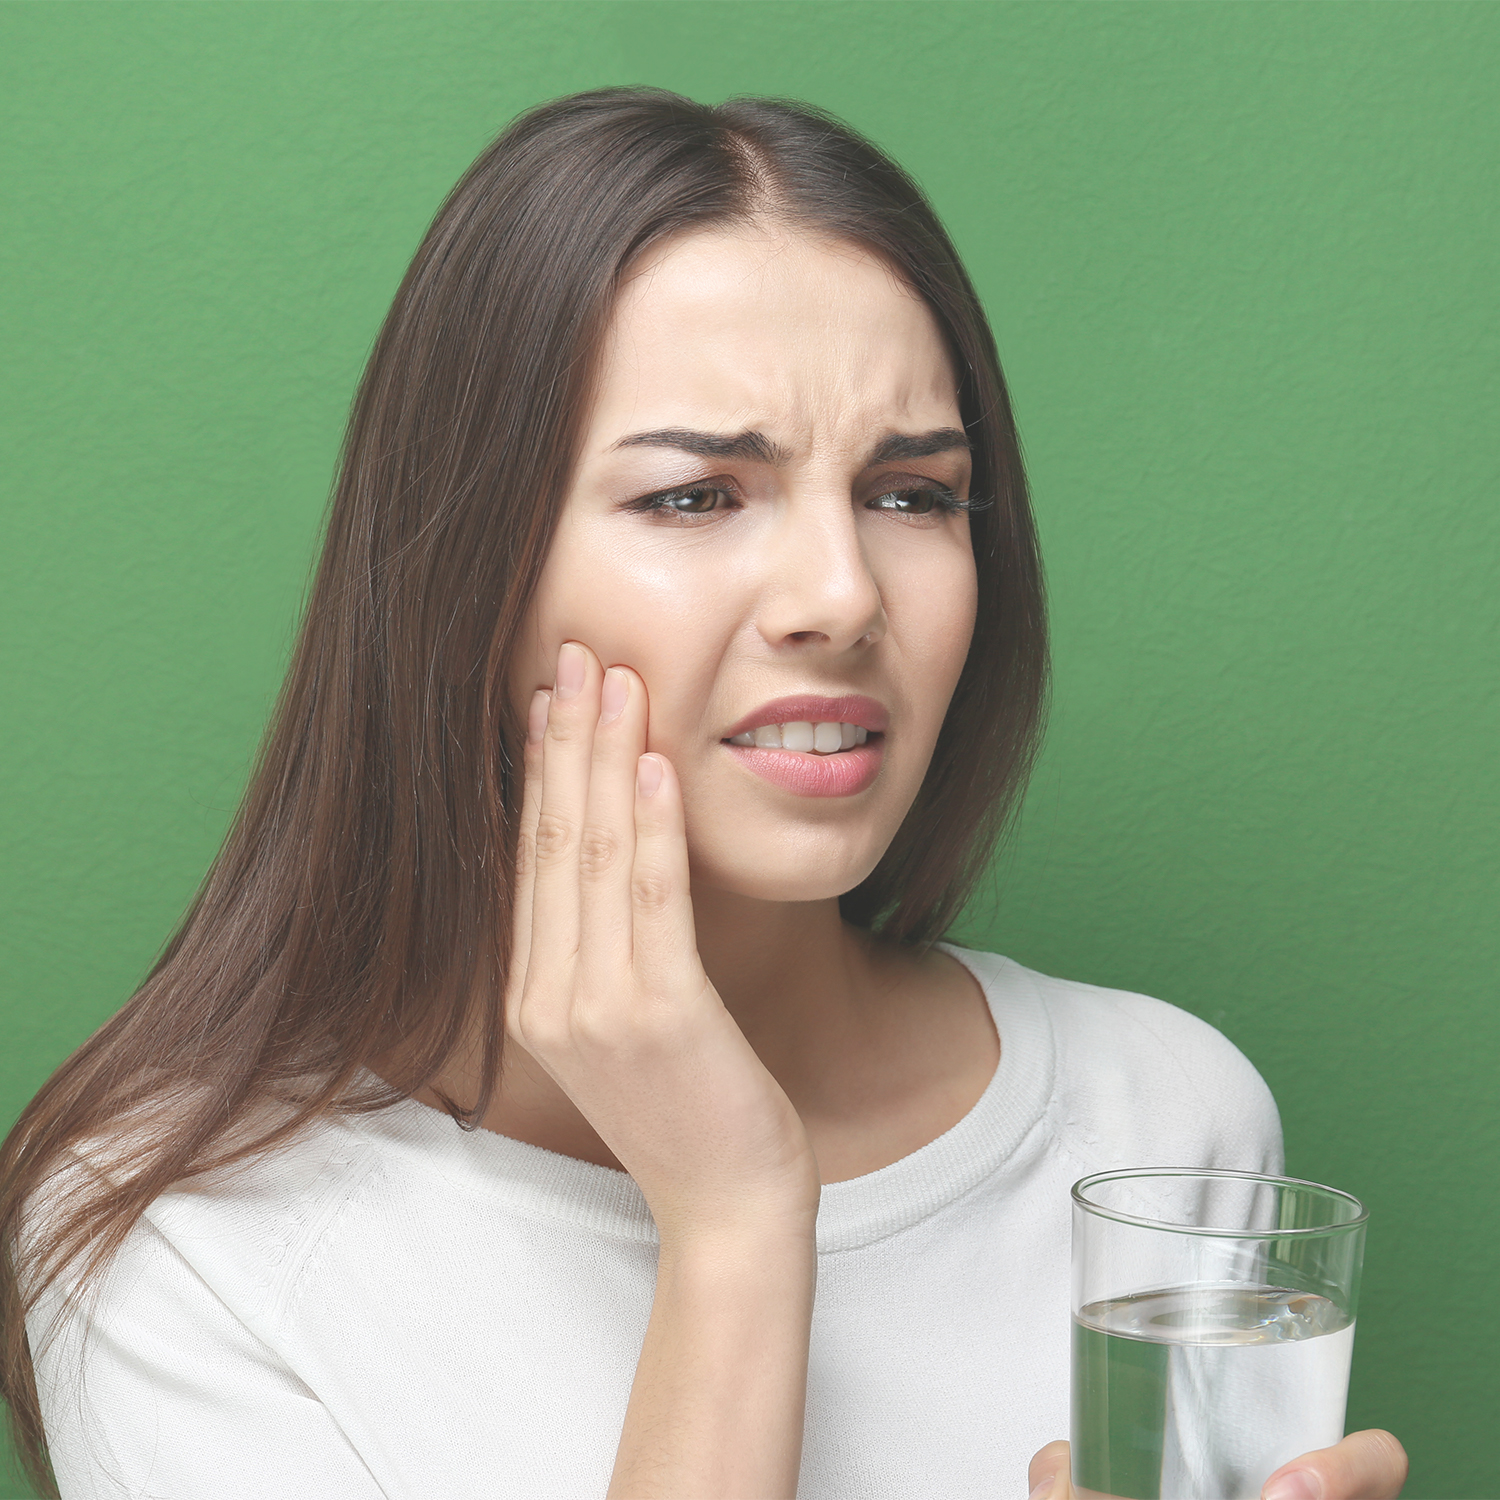 10 Easy Natural Remedies for Tooth Sensitivity